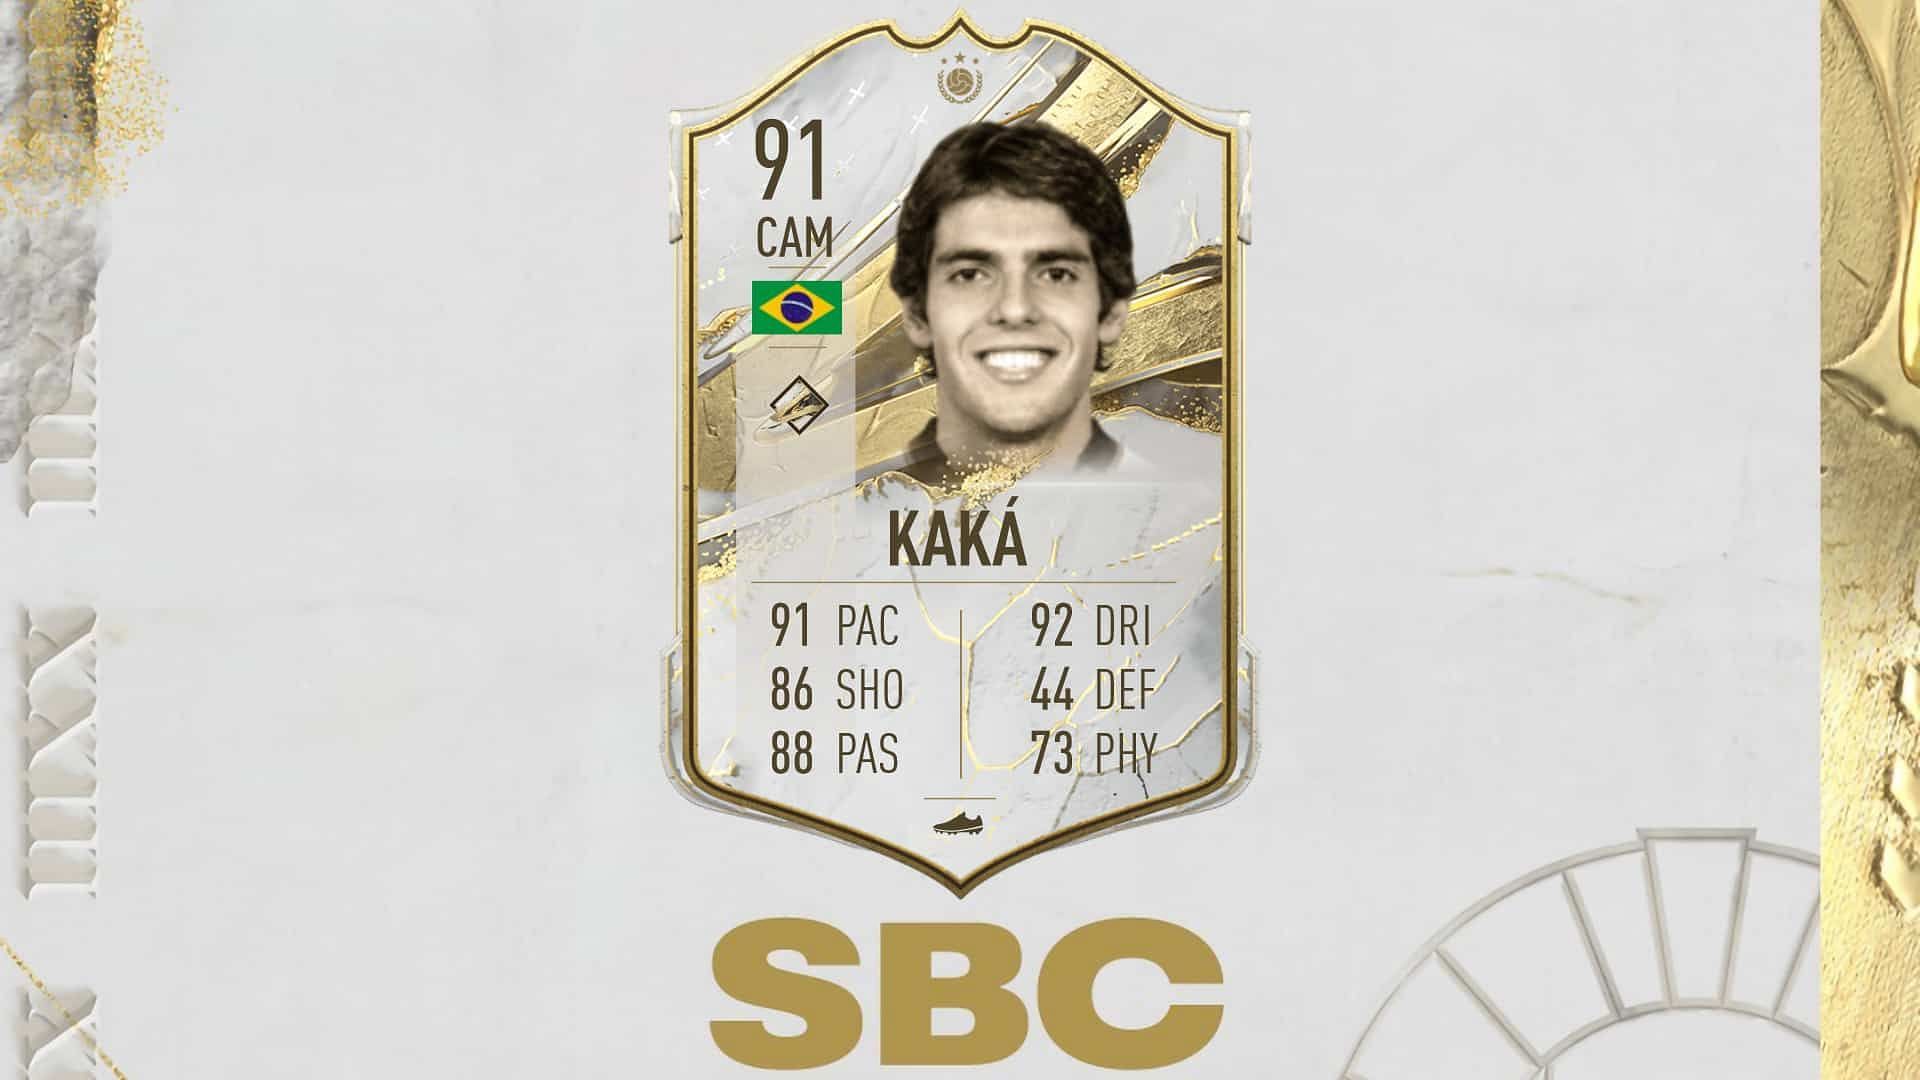 FIFA 23 Kaka Prime Icon SBC - How to complete, estimated cost, and more ...